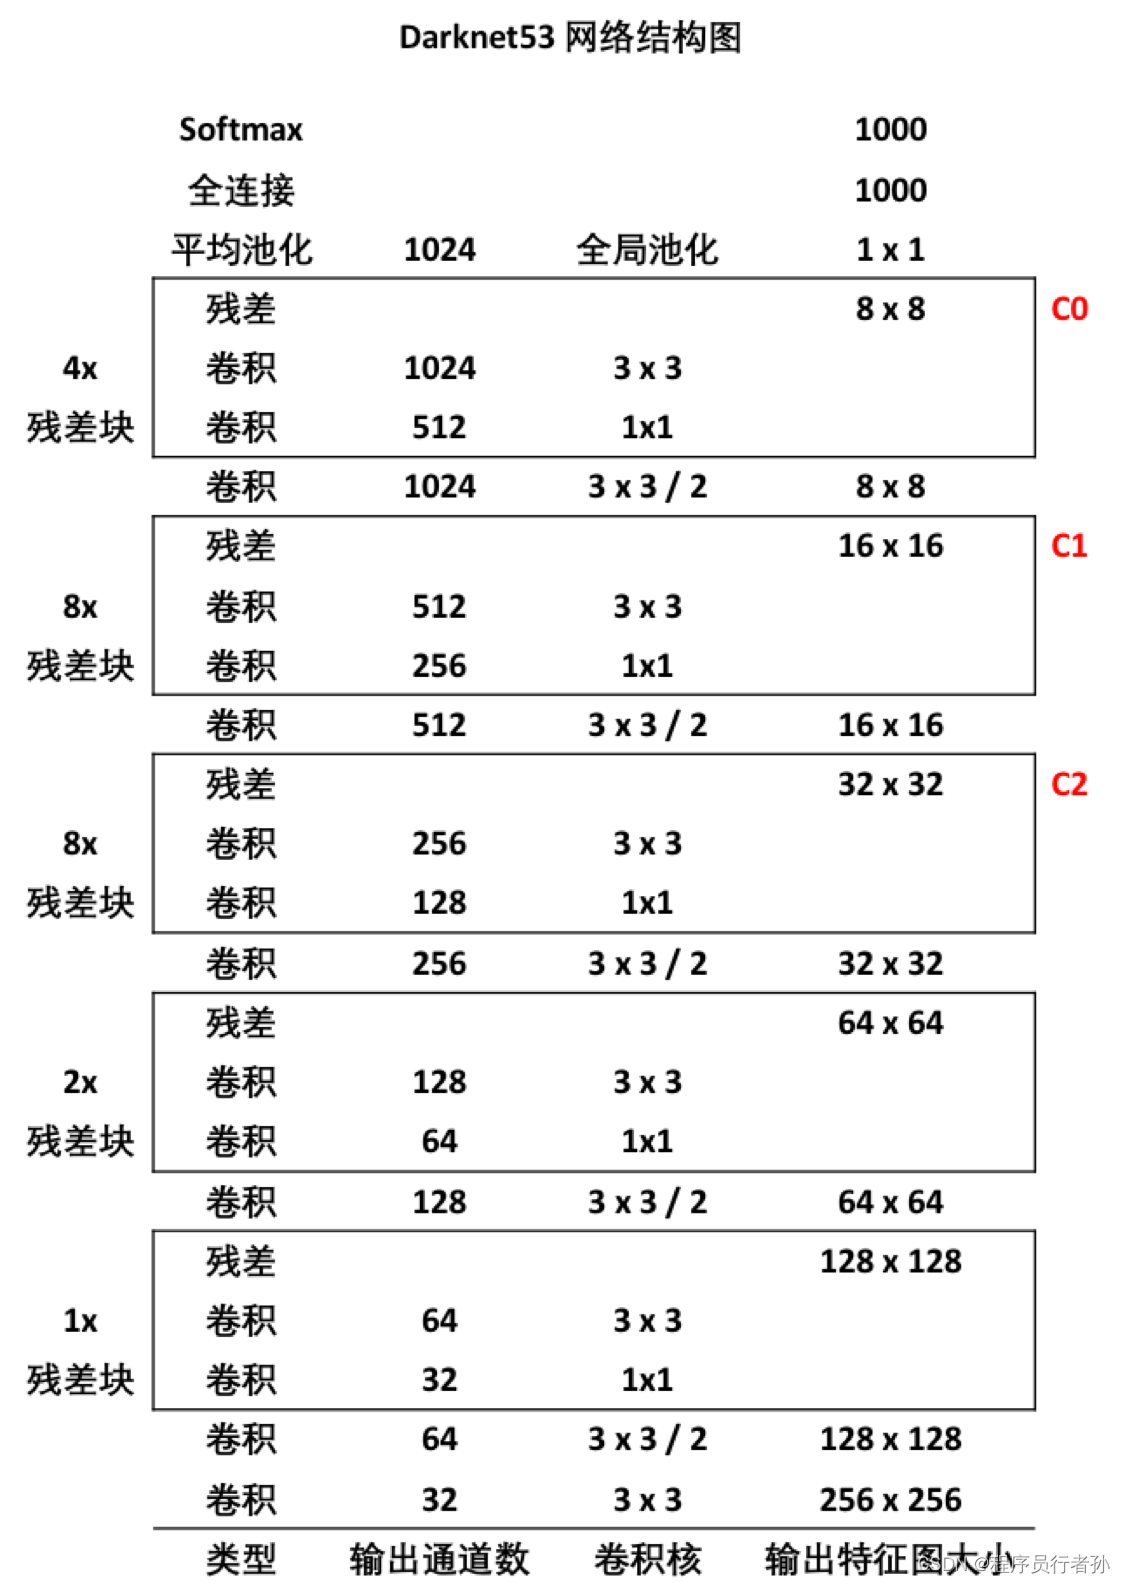 Darknet，看过<span style='color:red;'>很</span><span style='color:red;'>多</span>篇，<span style='color:red;'>这个</span>最清晰了